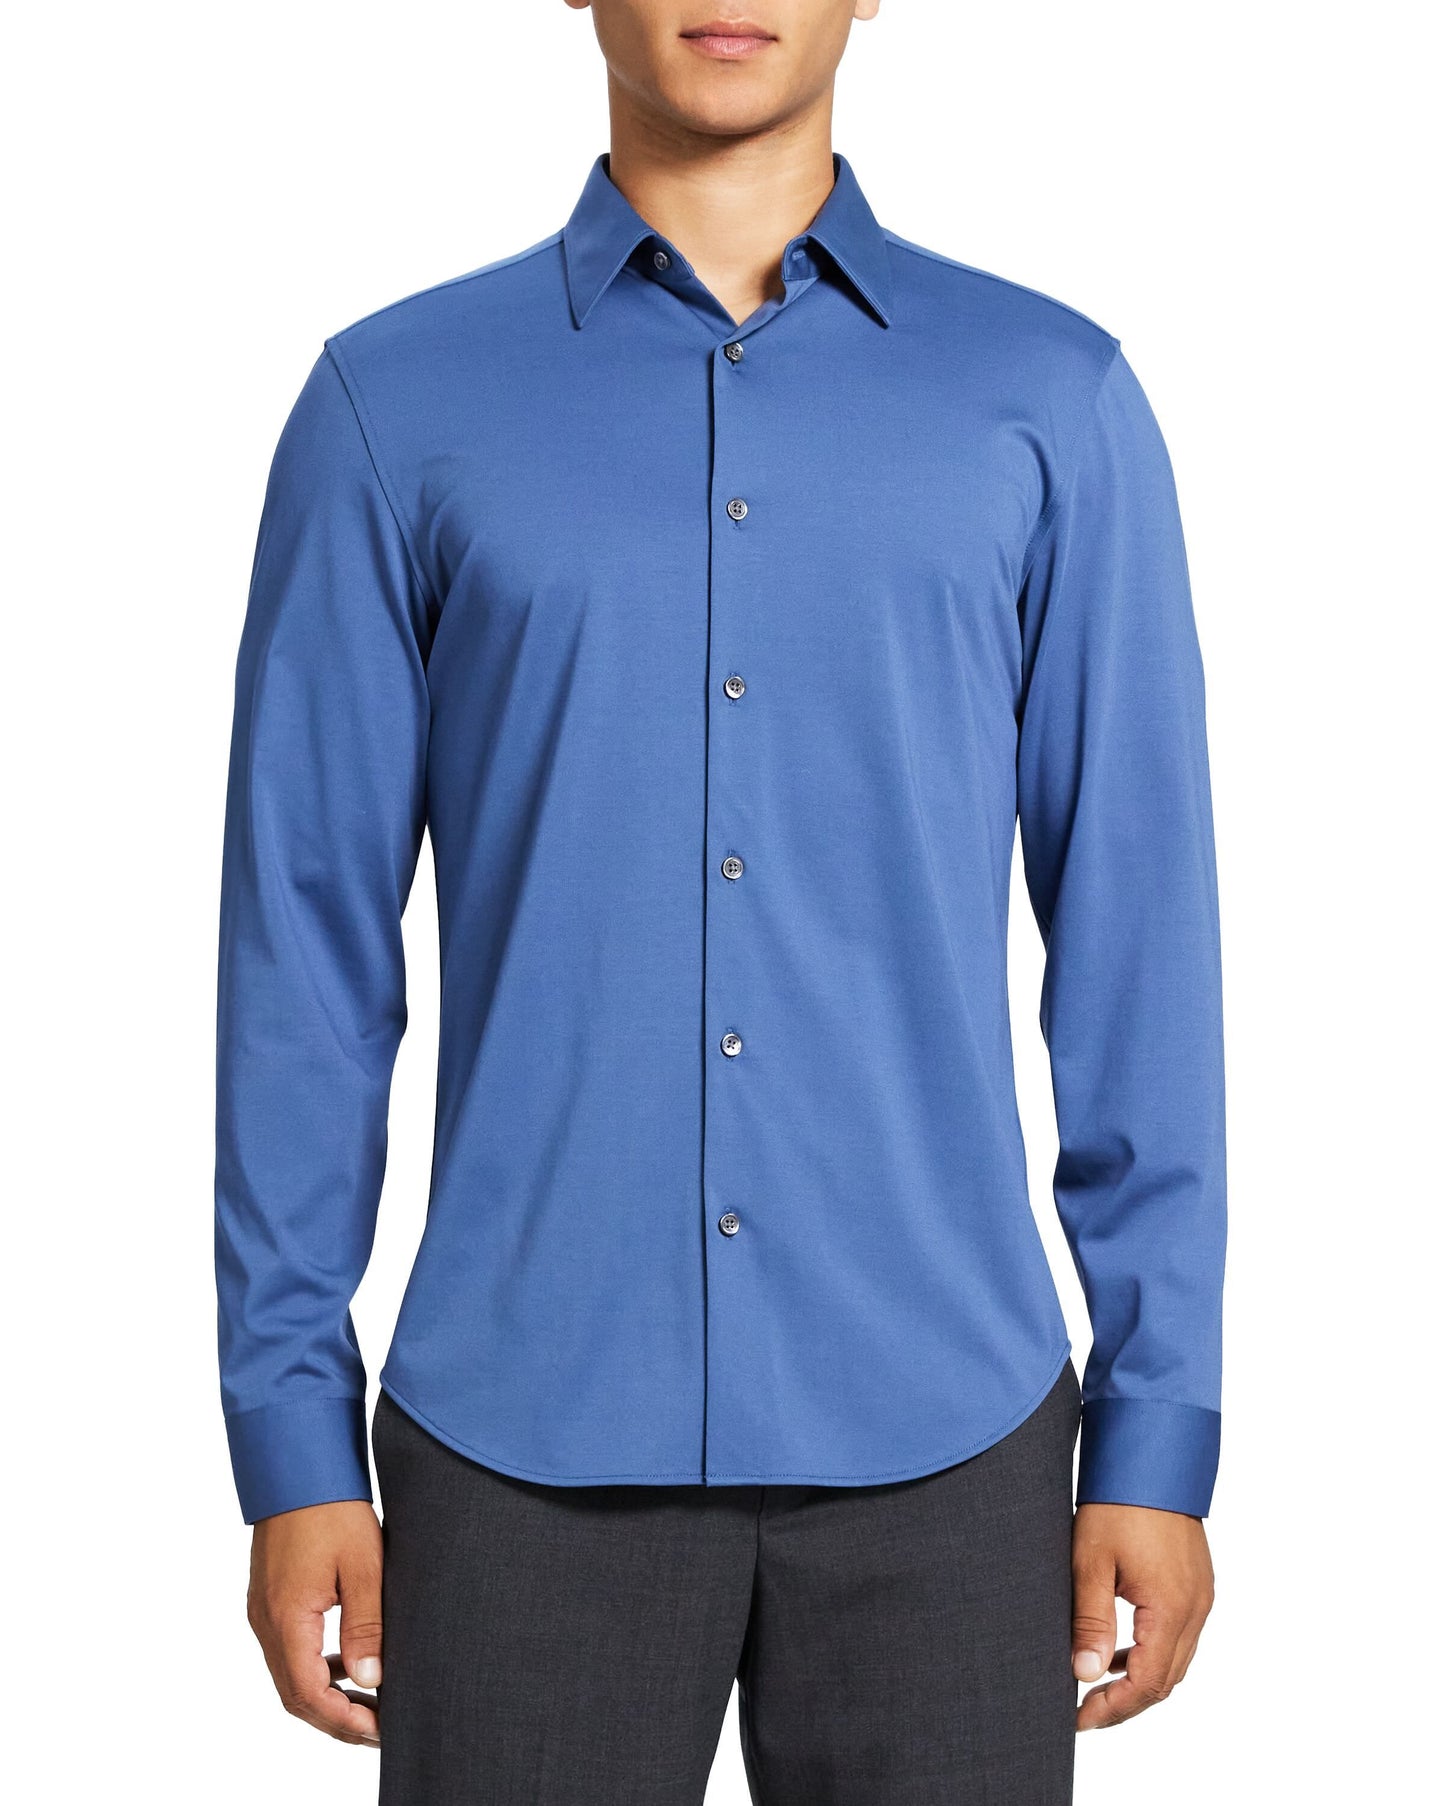 Sylvain Structure Knit Tailored Shirt Atlantic - Theory